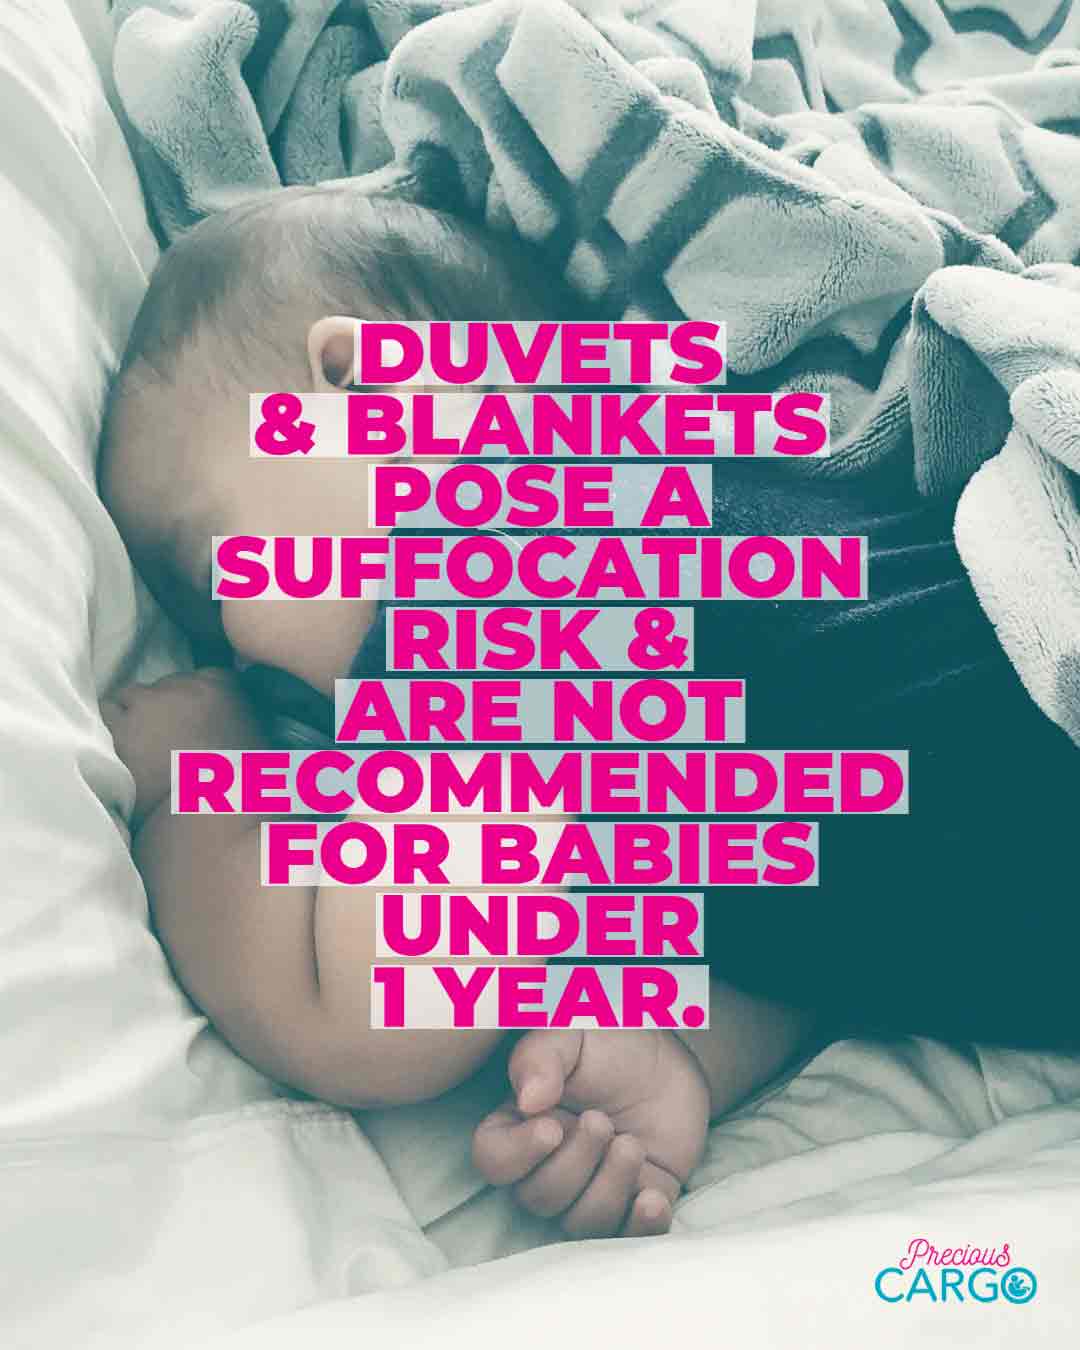 it is not safe to use duvet in baby's cot